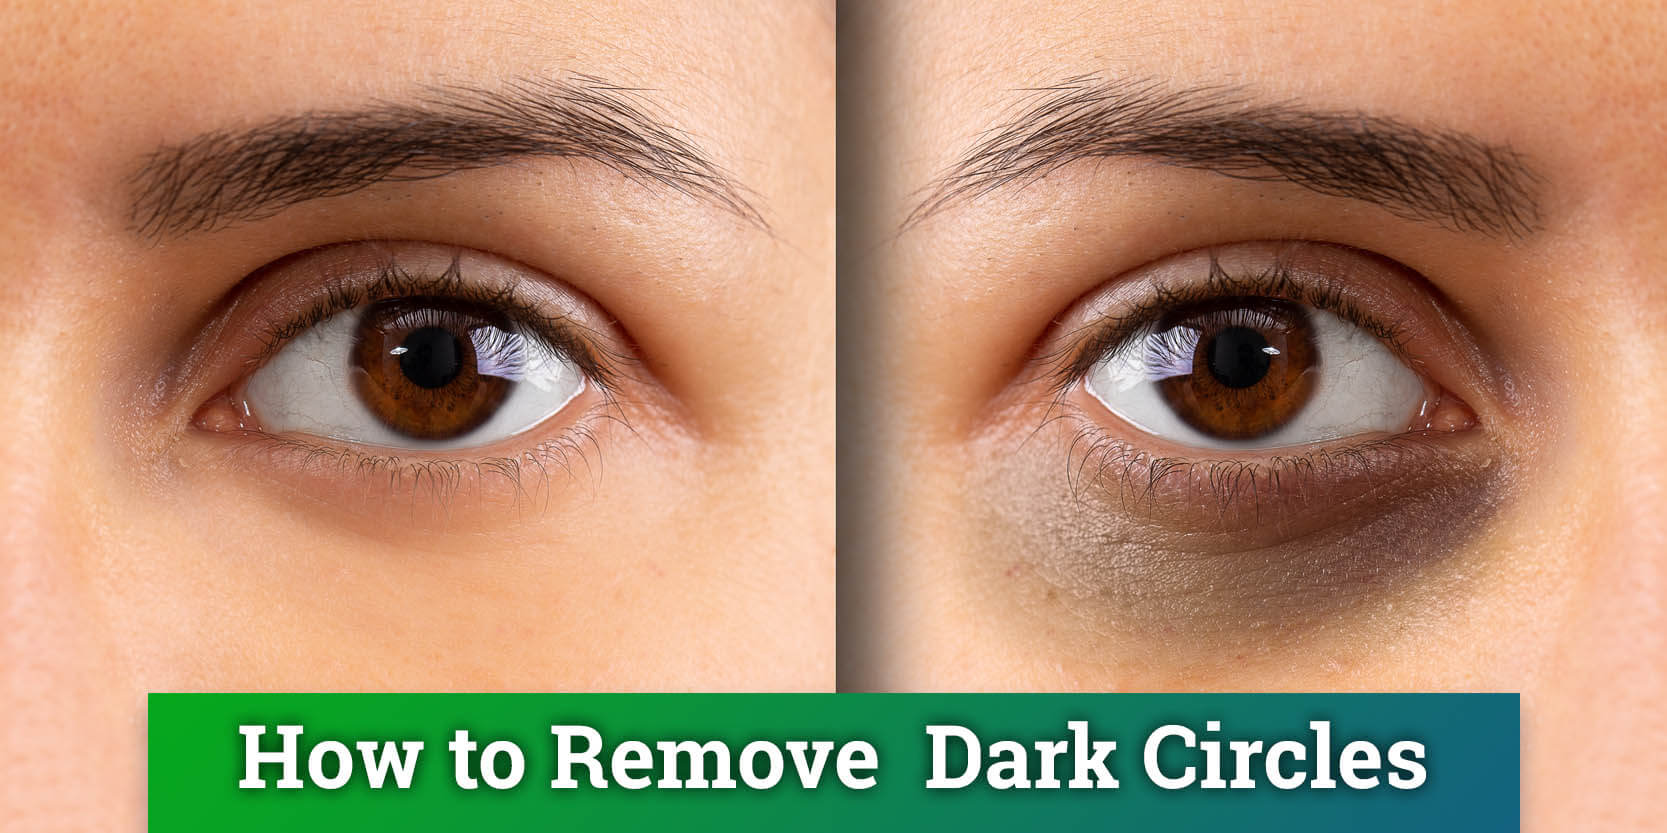 How to remove dark circles under your eyes